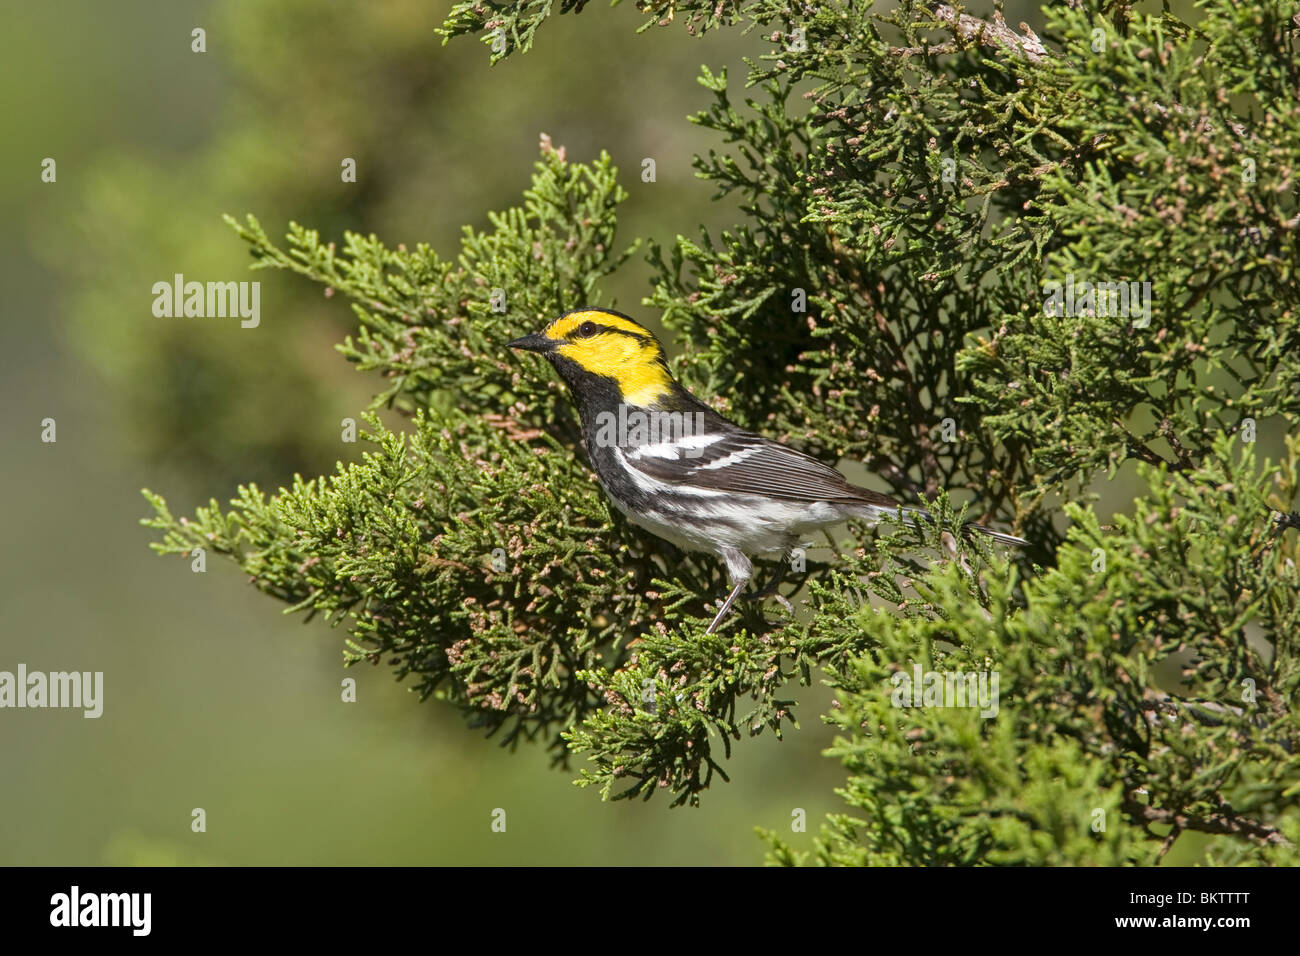 Golden cheeked Warbler perched on Ashe Juniper Tree Stock Photo